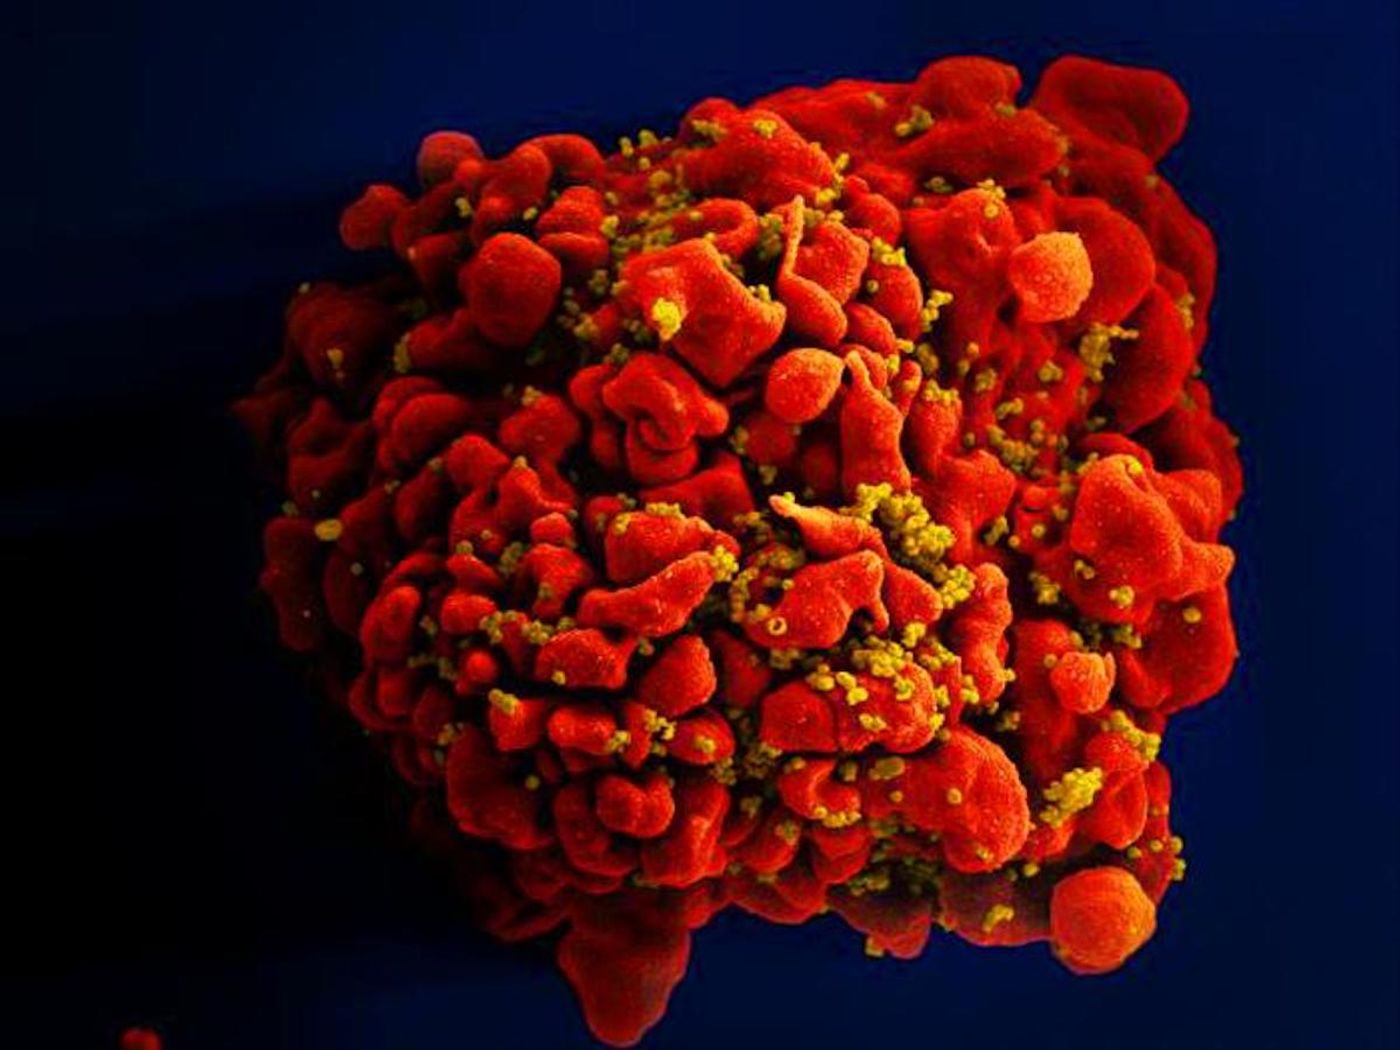 A digitally colorized SEM image of a red-colored, H9-T cell infected by numerous, mustard-colored human immunodeficiency virus (HIV) particles, which can be seen attached to the cell's surface membrane. / Credit: National Institute of Allergy and Infectious Diseases (NIAID)